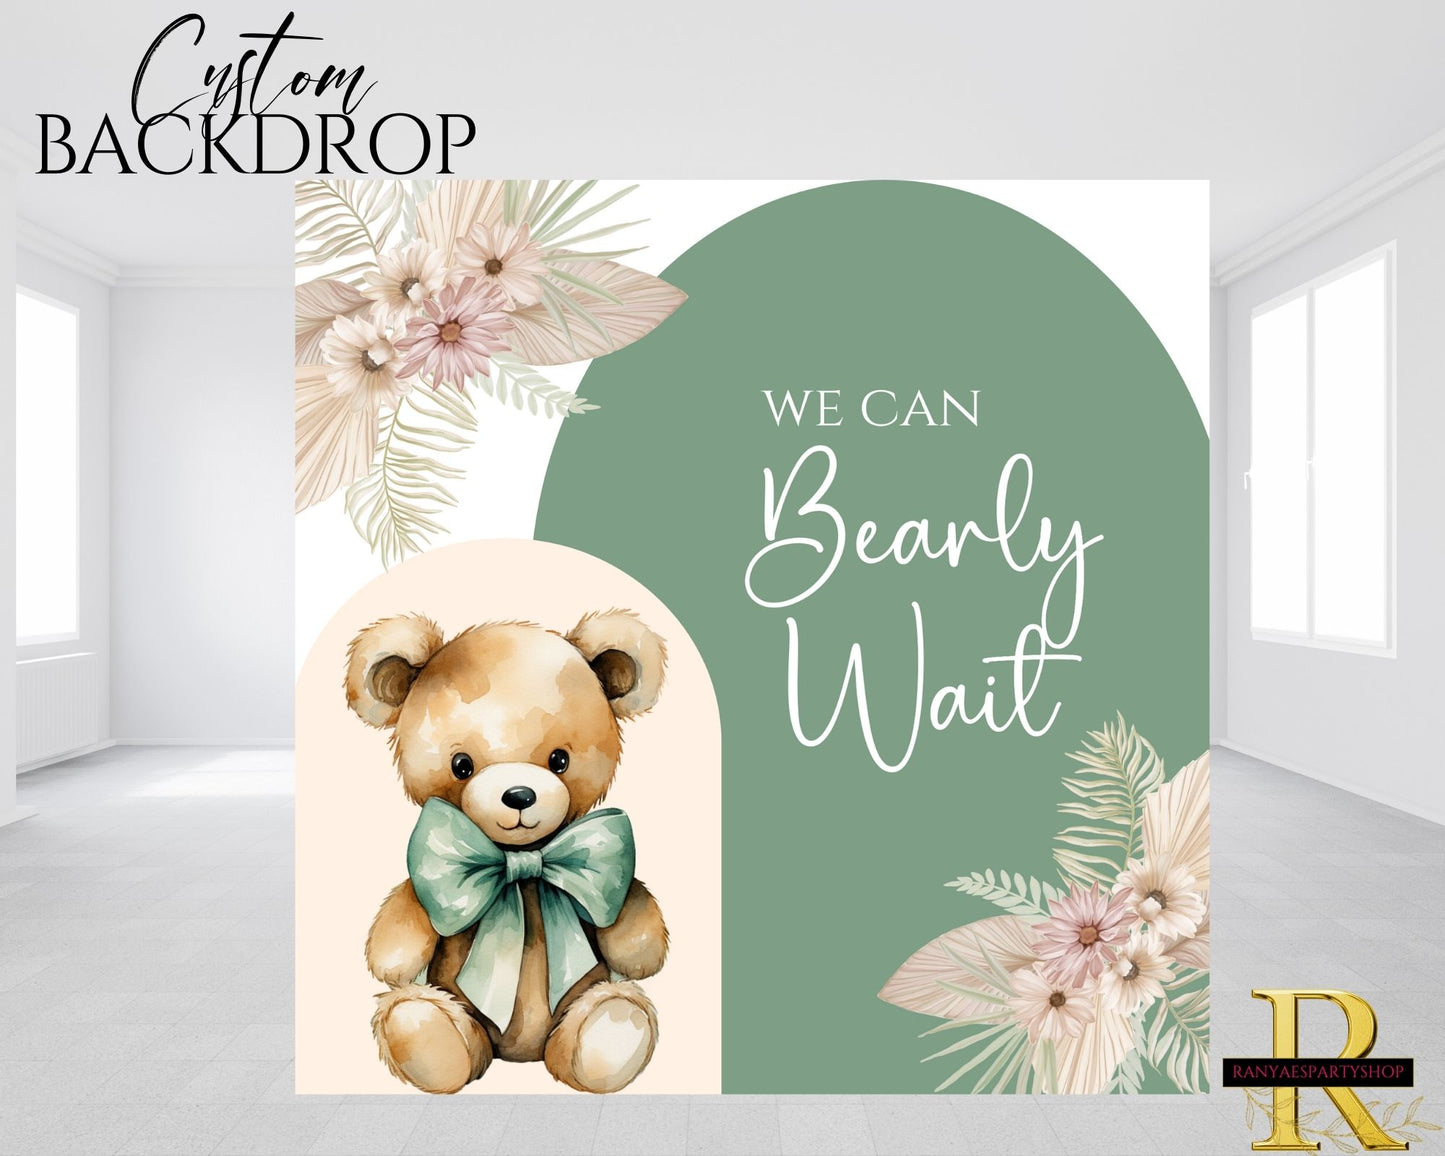 We Can Bearly Wait Baby Shower  Backdrop | Bearly Wait Baby Shower | Baby Shower Decorations | Beary Baby Shower